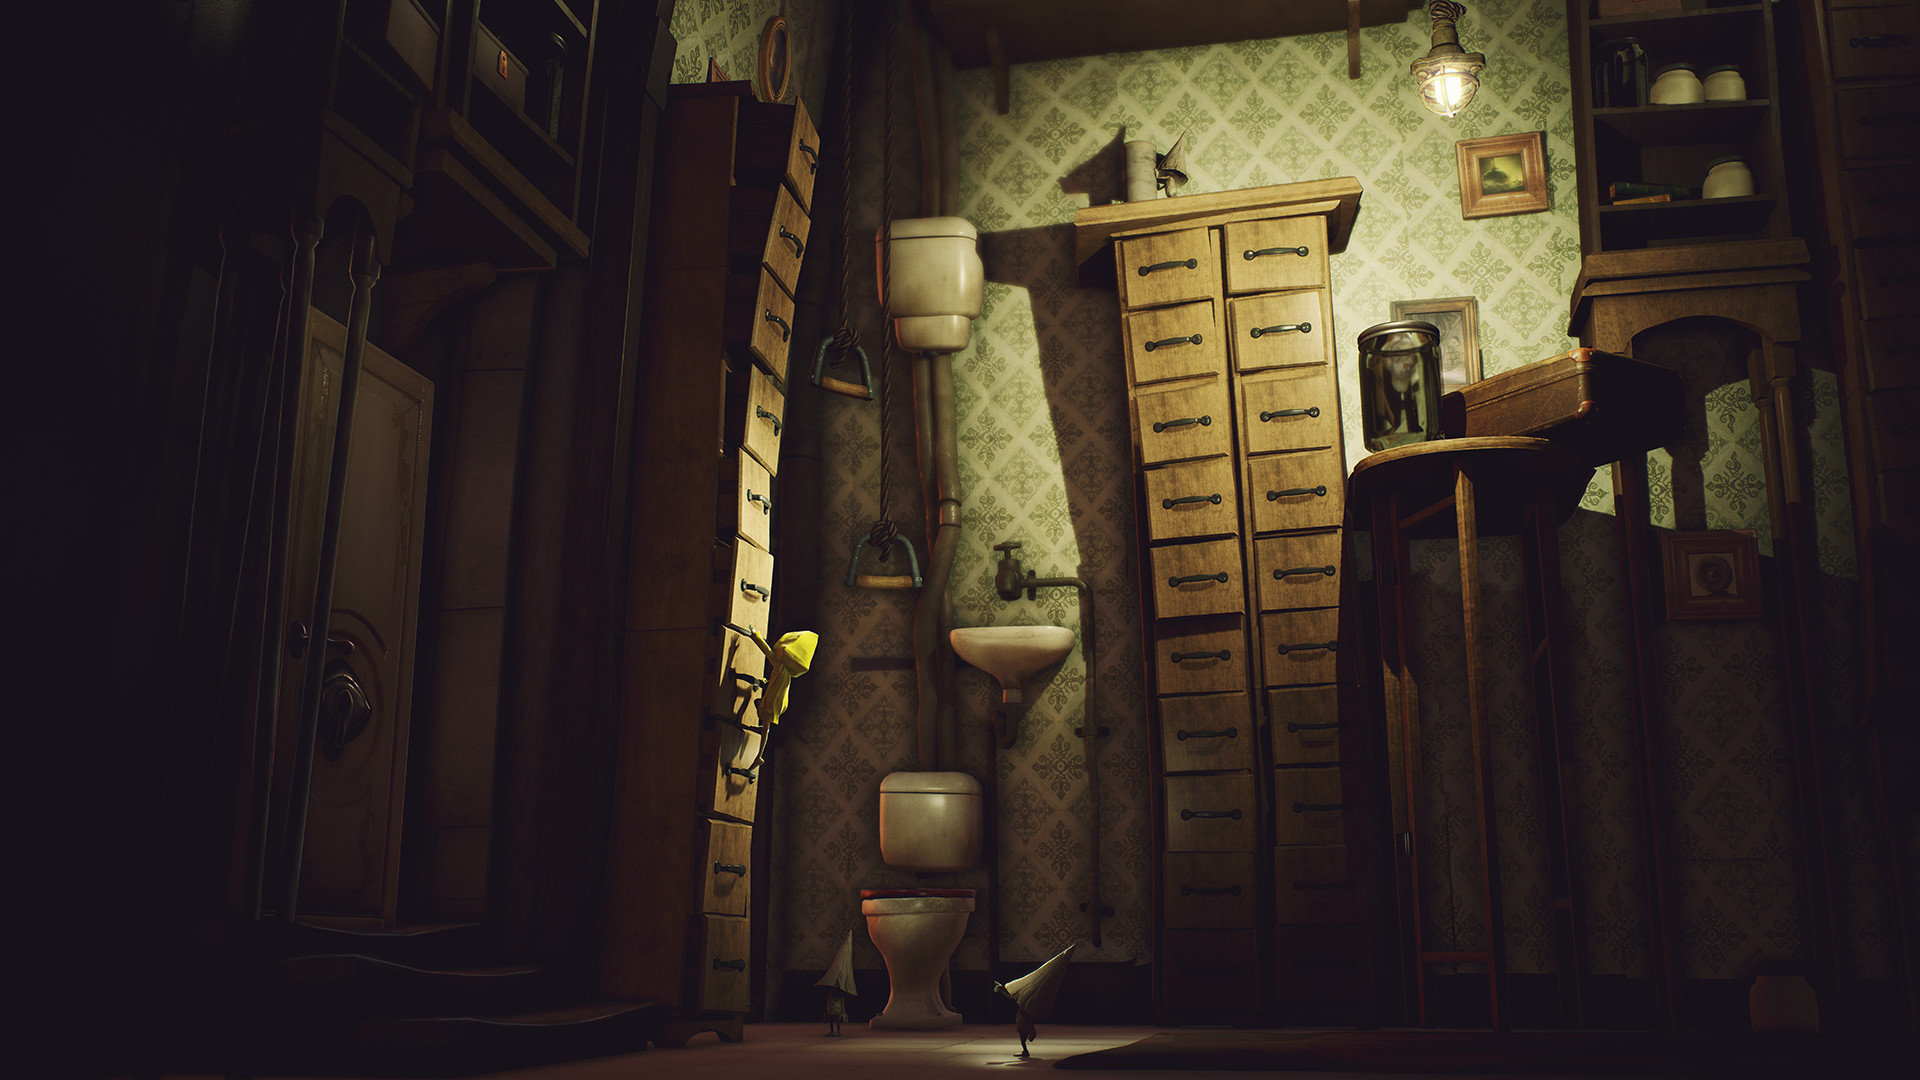 Little Nightmares - Secrets of The Maw Expansion Pass on Steam